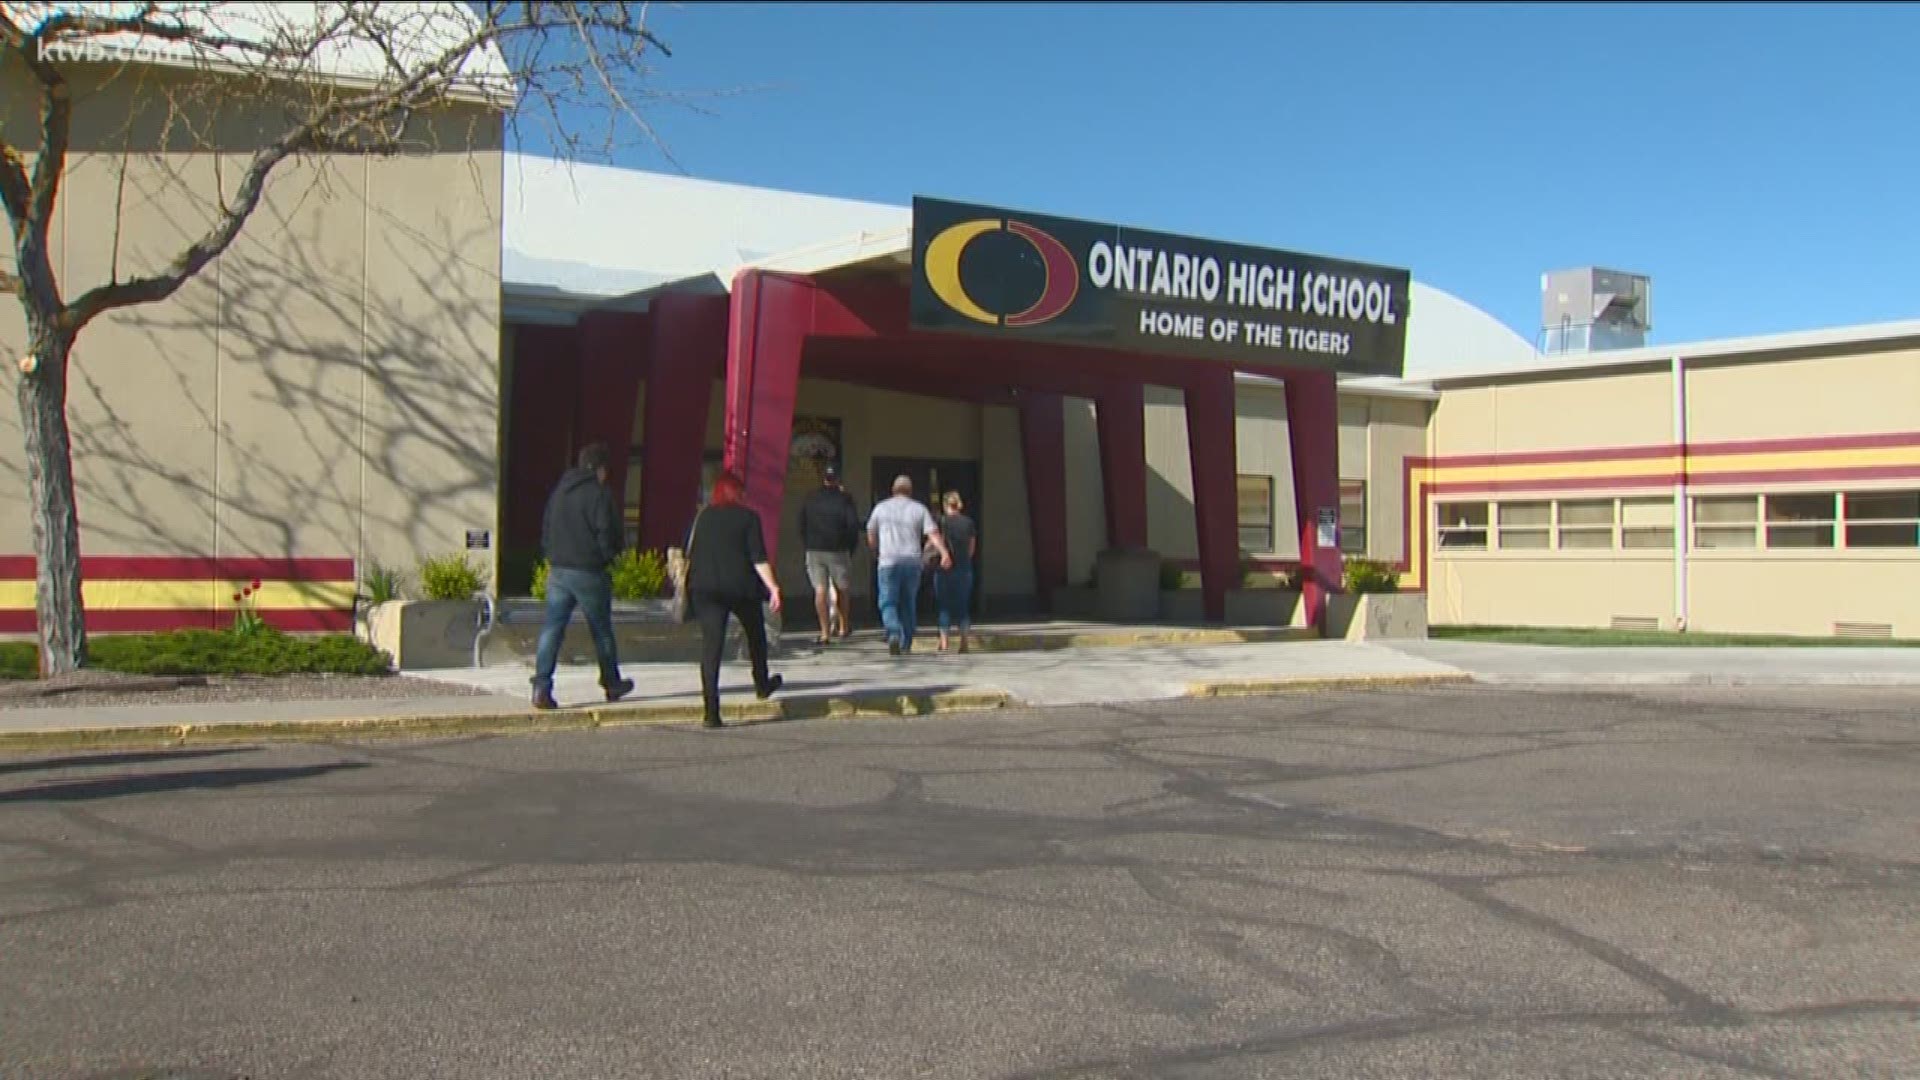 The Ontario School District is looking to pass a $25 million bond in May that would improve security at schools, and update decades-old buildings.